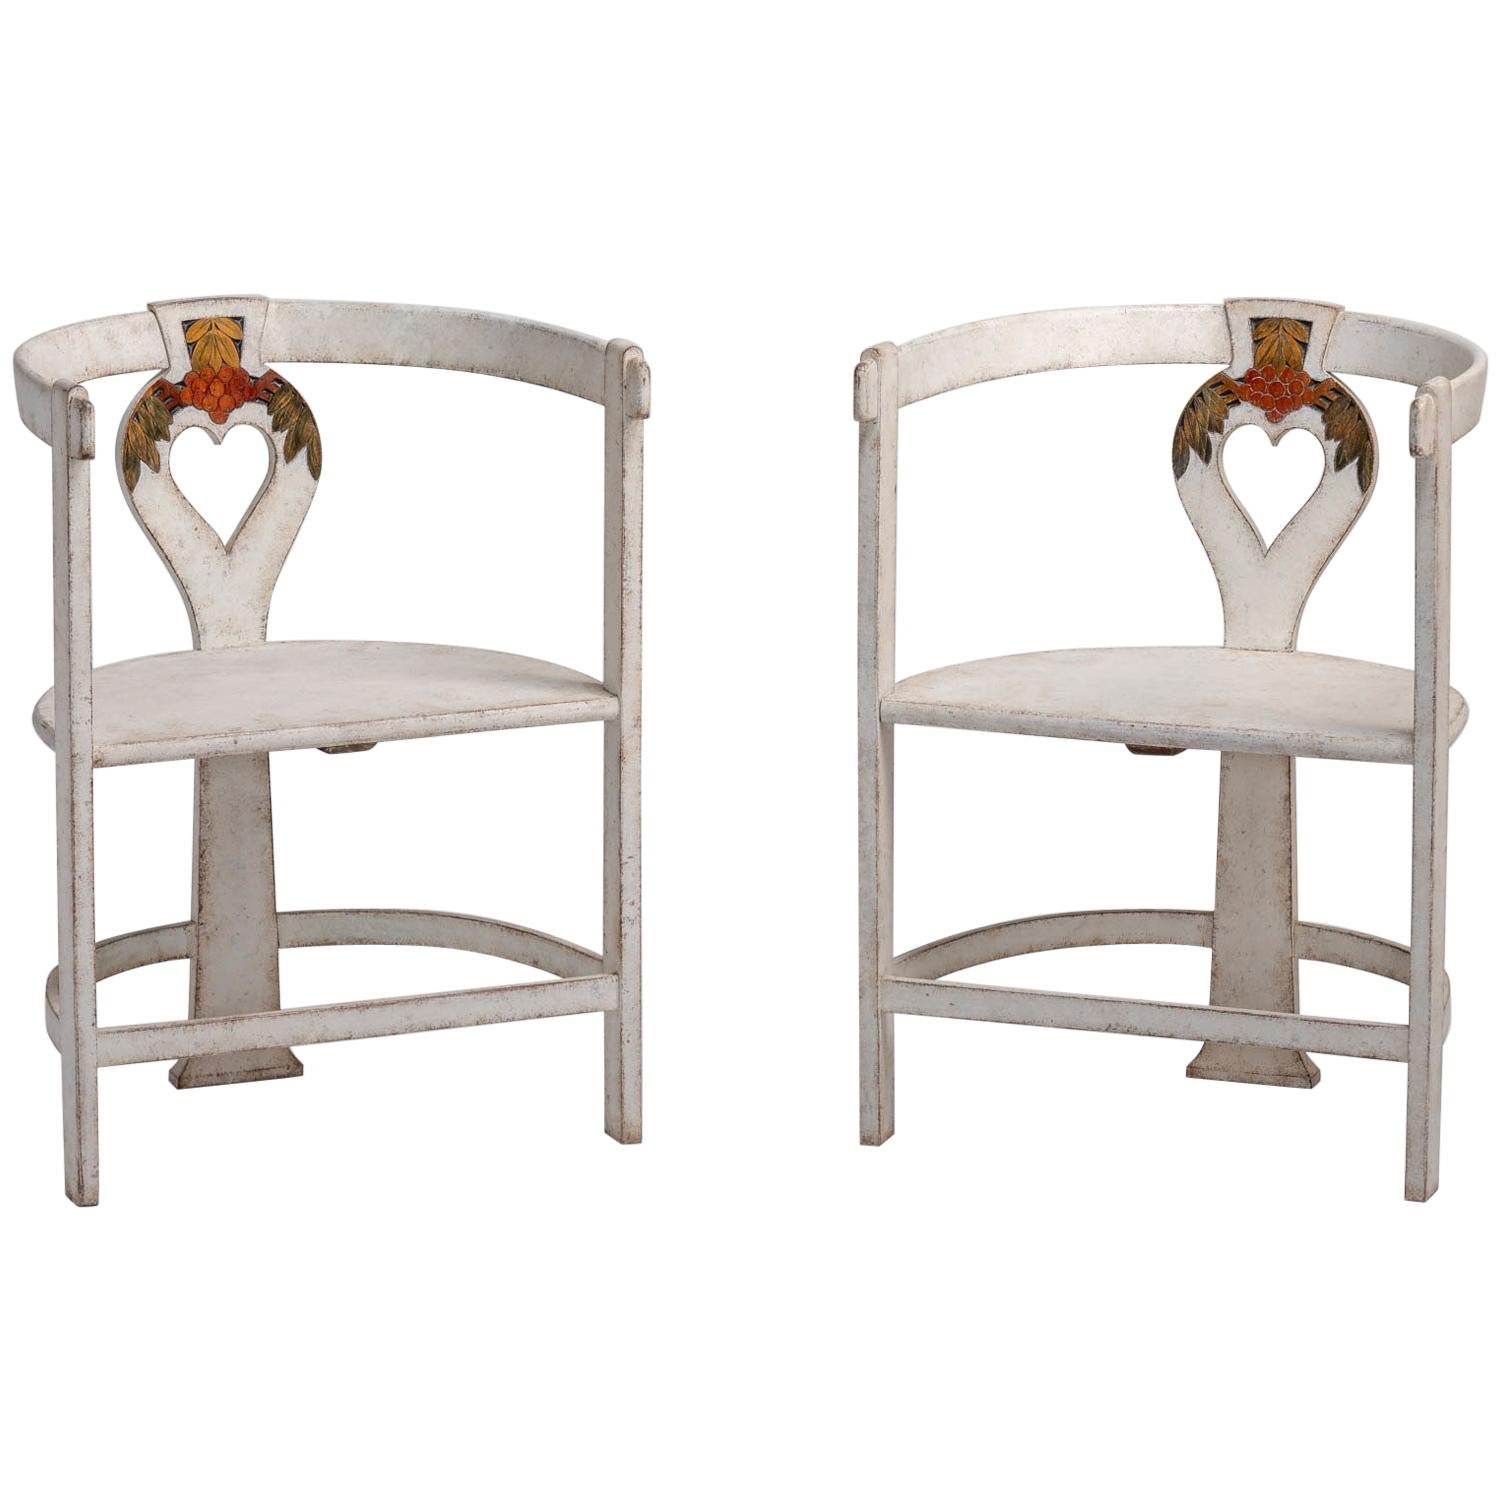 Rare Pair of Artists Chairs, Sweden, circa 1910